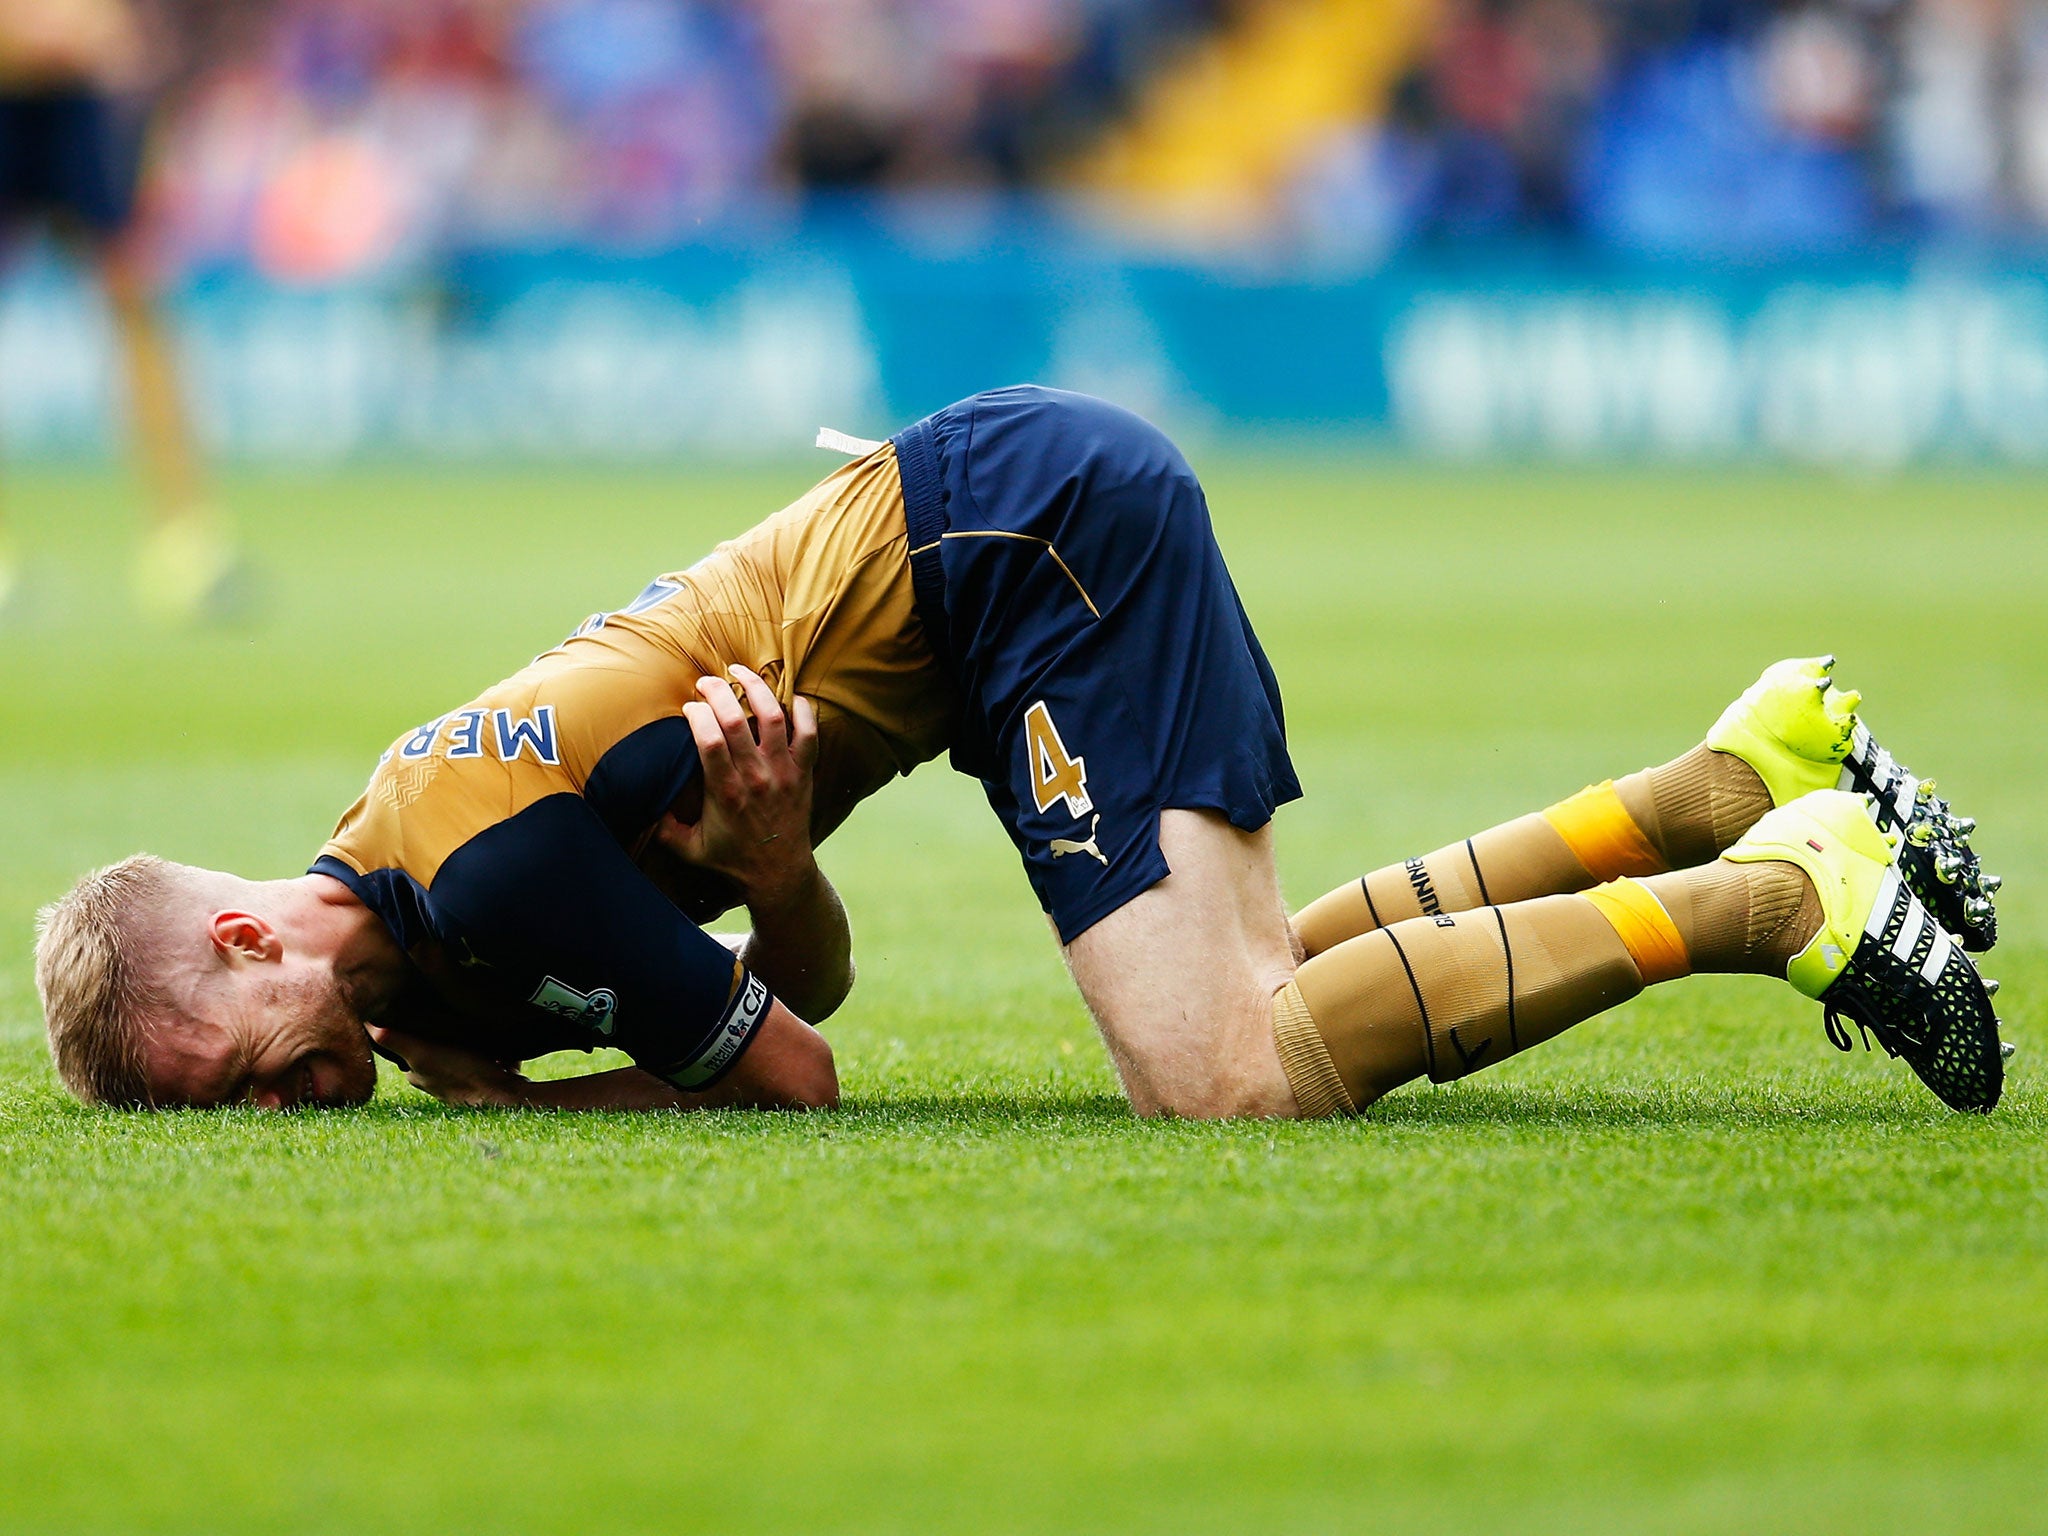 Arsenal defender Per Mertesacker lays injured during the Gunners' Premier League win over Crystal Palace